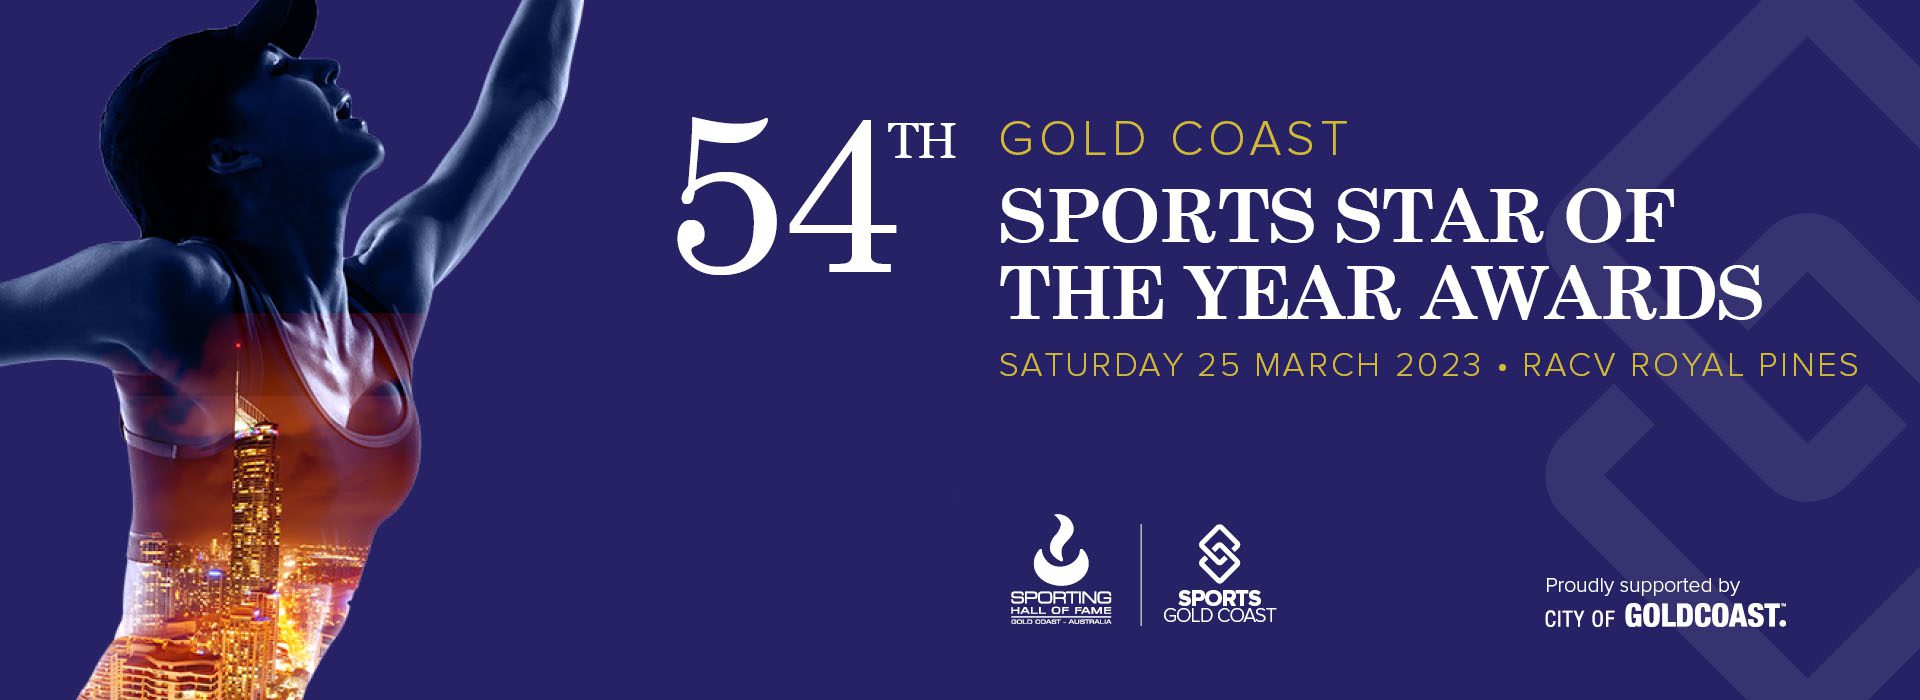 Gold Coast Sport Star of the Year Awards 2023